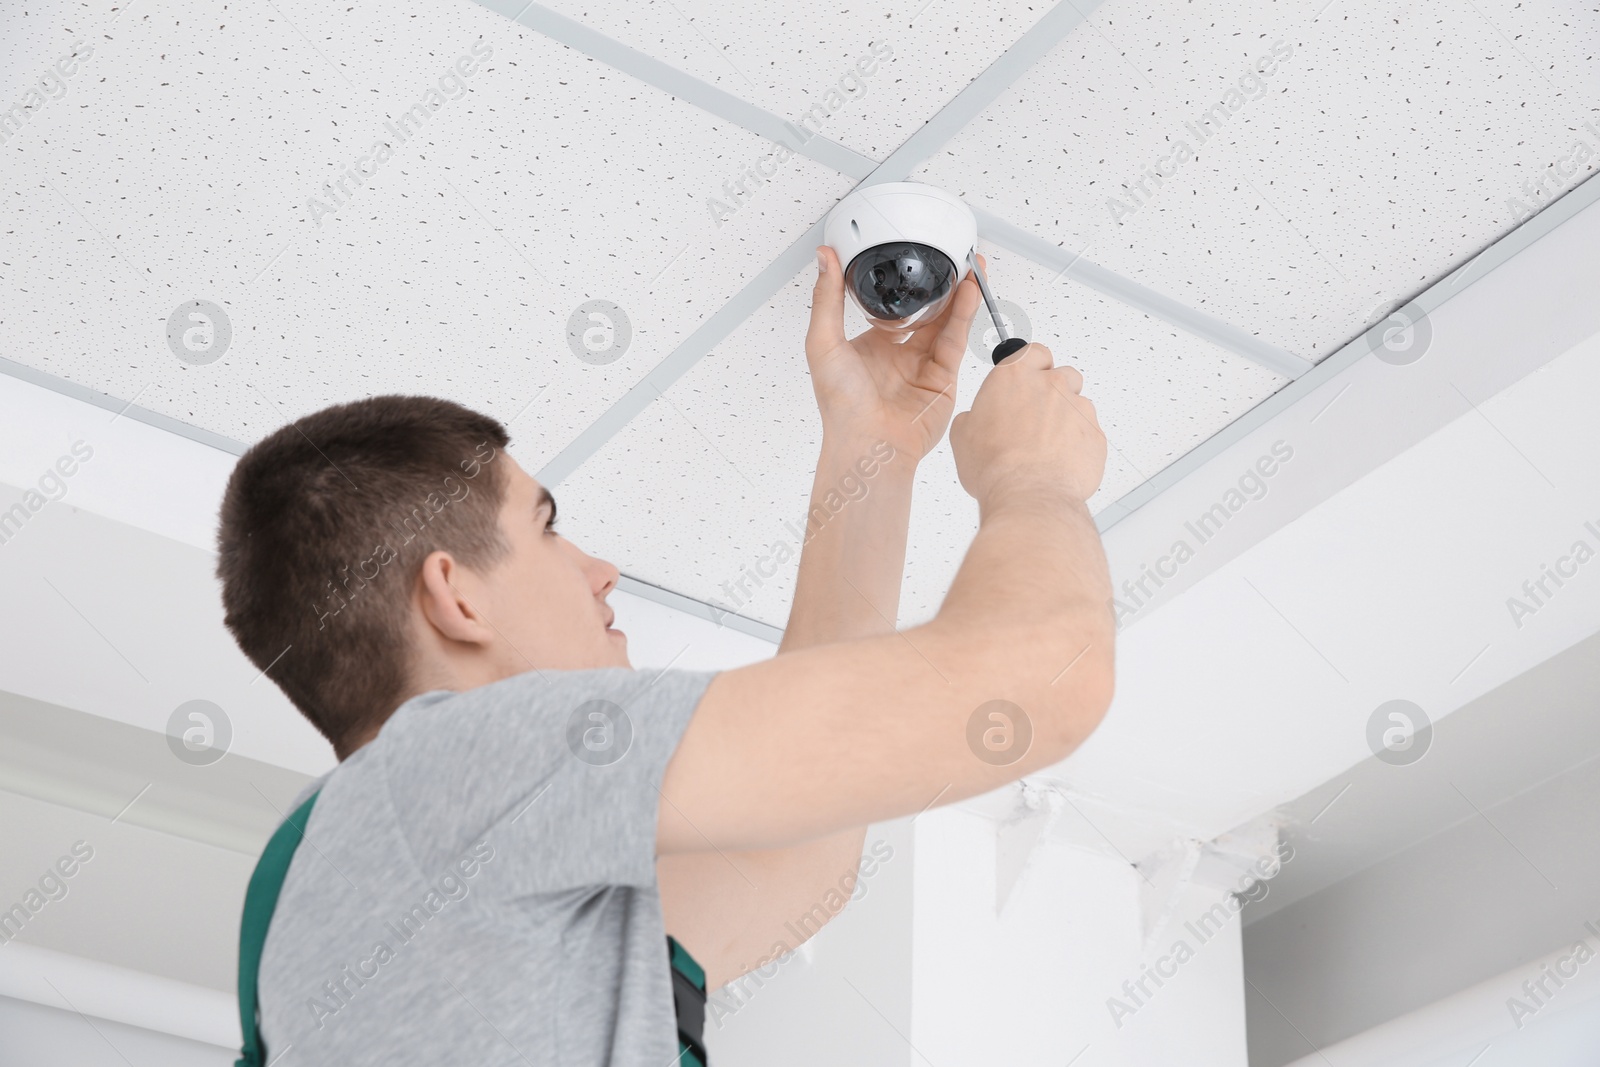 Photo of Technician with screwdriver installing CCTV camera on ceiling indoors, low angle view